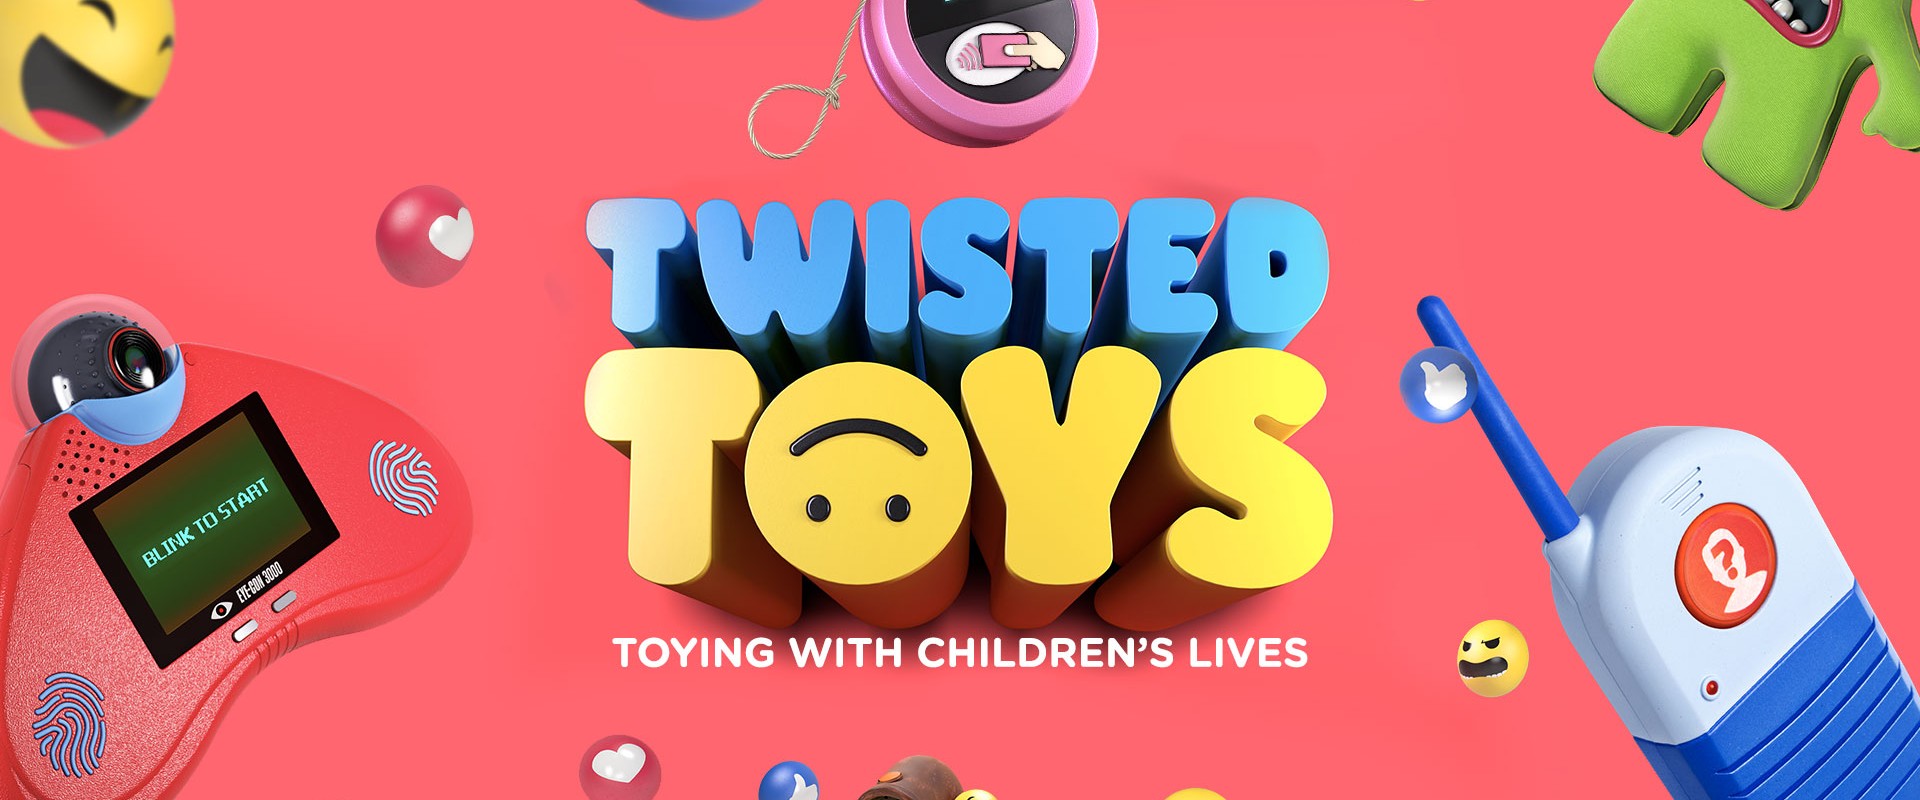 Twisted Toys exposes how children’s data are exploited and their rights systematically violated online